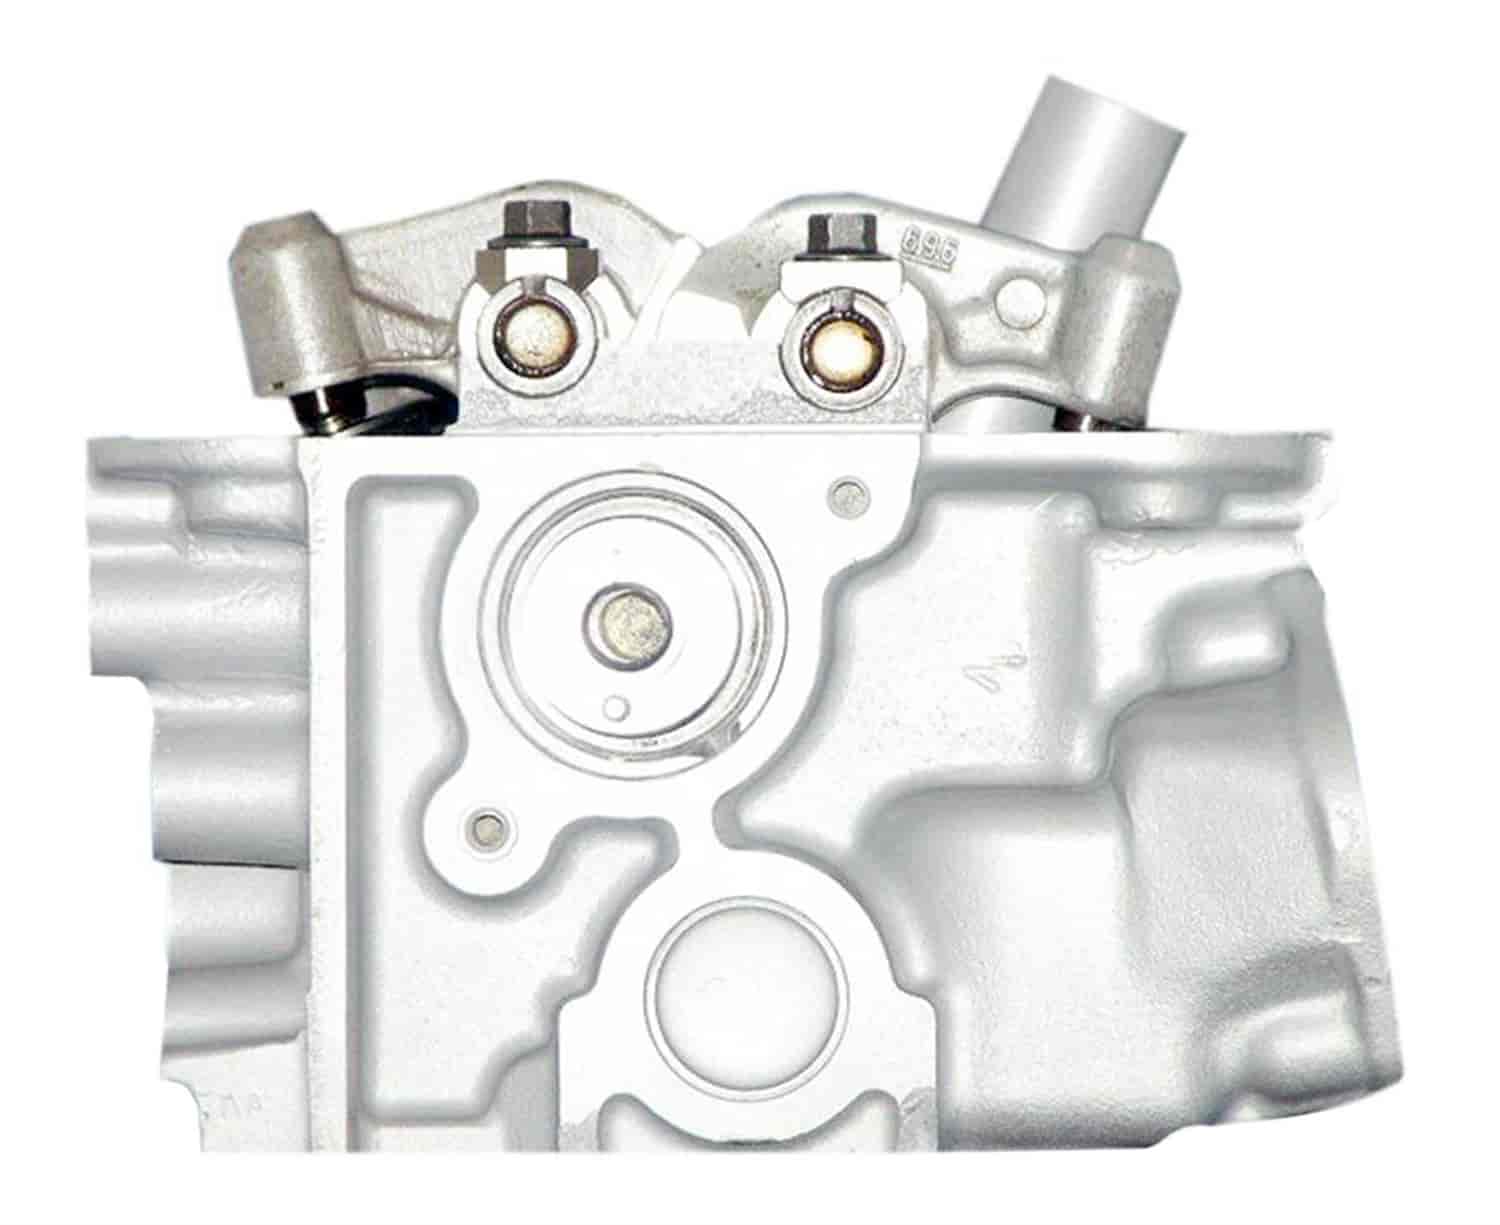 Remanufactured Cylinder Head for 2000-2005 Chrysler/Dodge/Plymouth with 2.0L L4